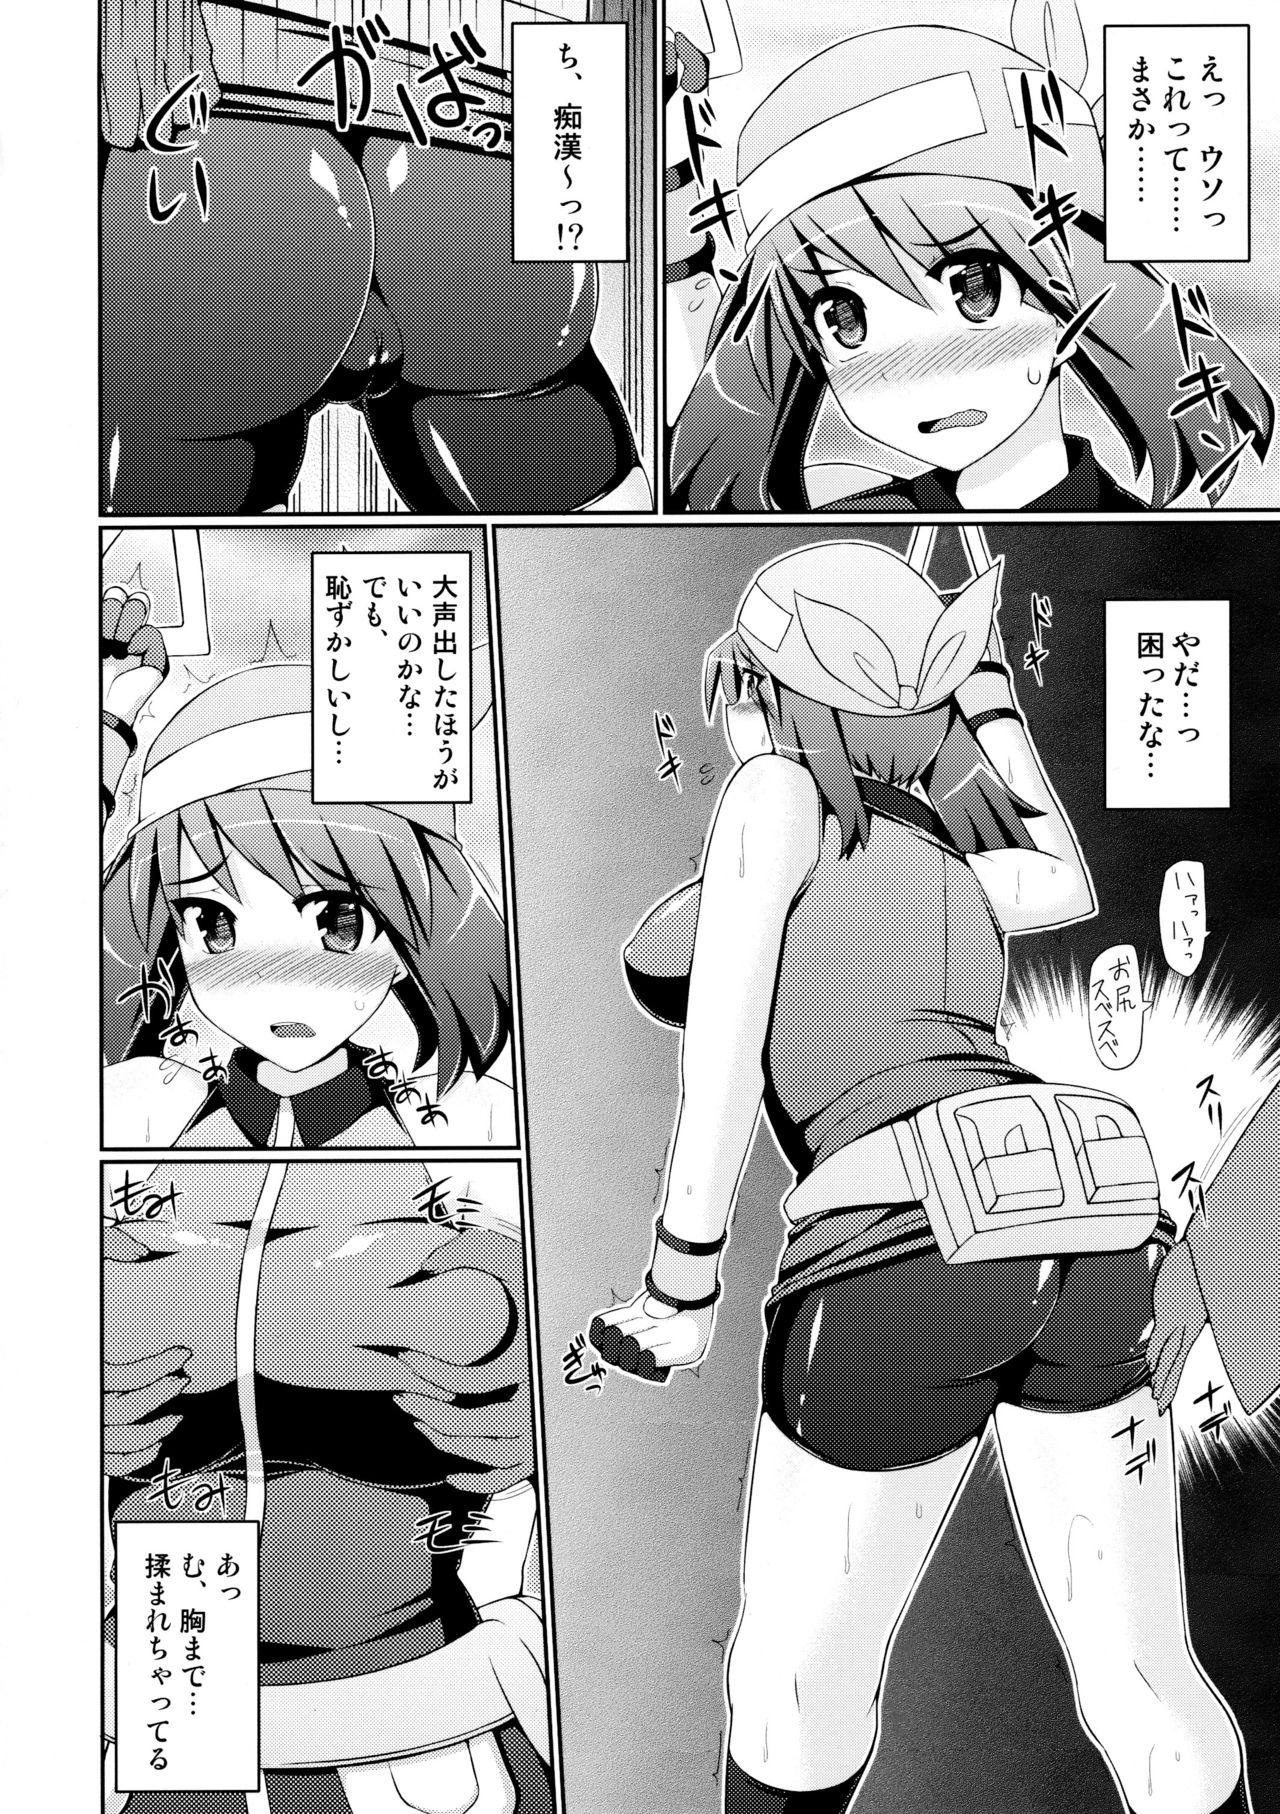 Soapy Super Groper Train - Chou Chikan Sharyou - Pokemon | pocket monsters Cums - Page 10